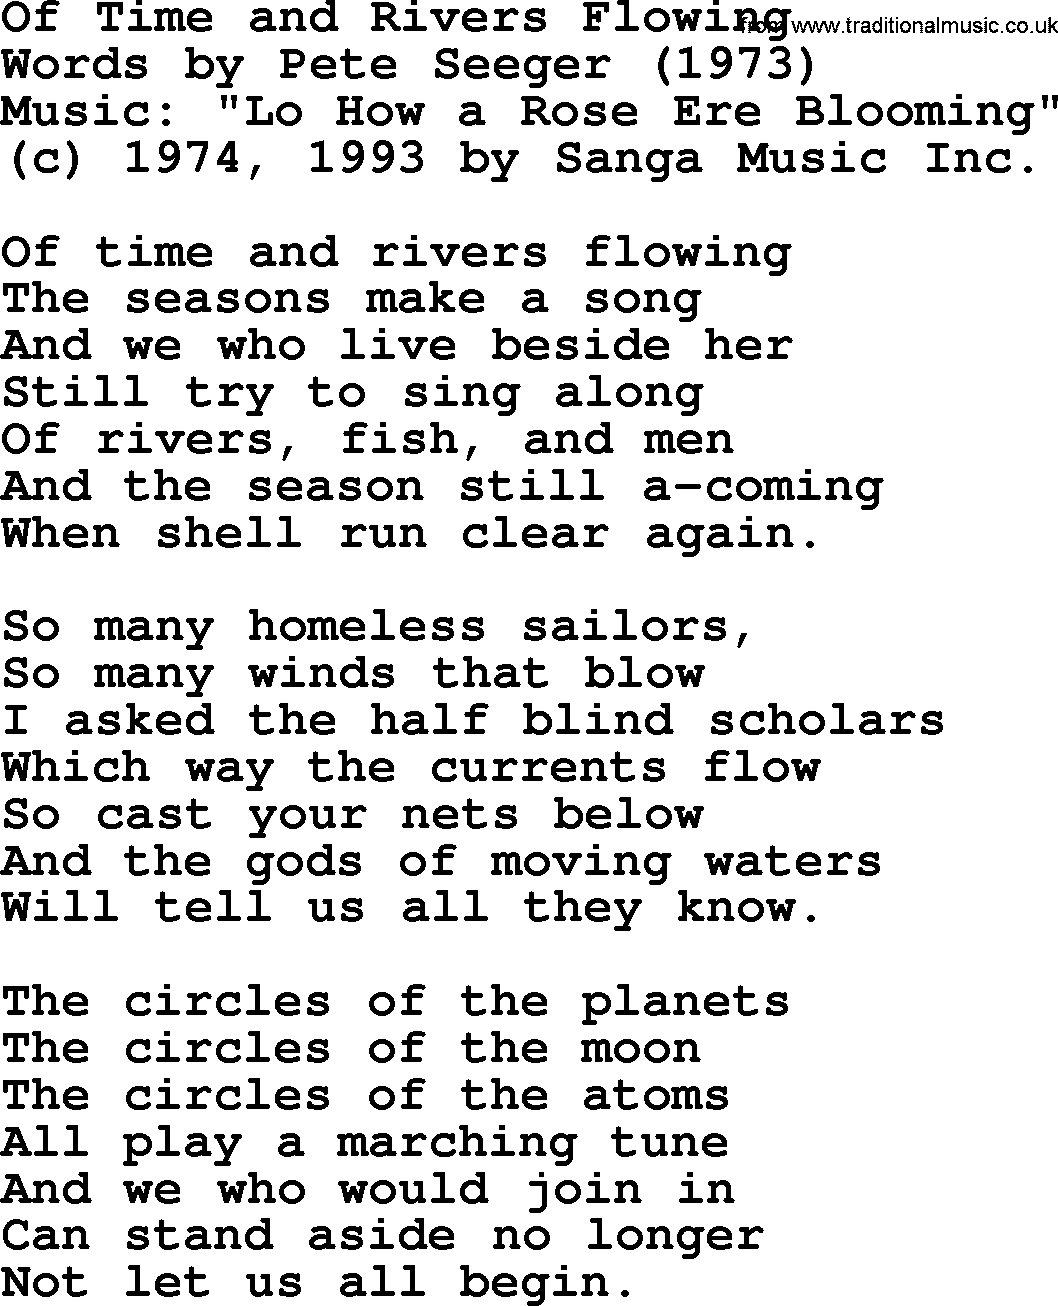 Pete Seeger song Of Time and Rivers Flowing-Pete-Seeger.txt lyrics